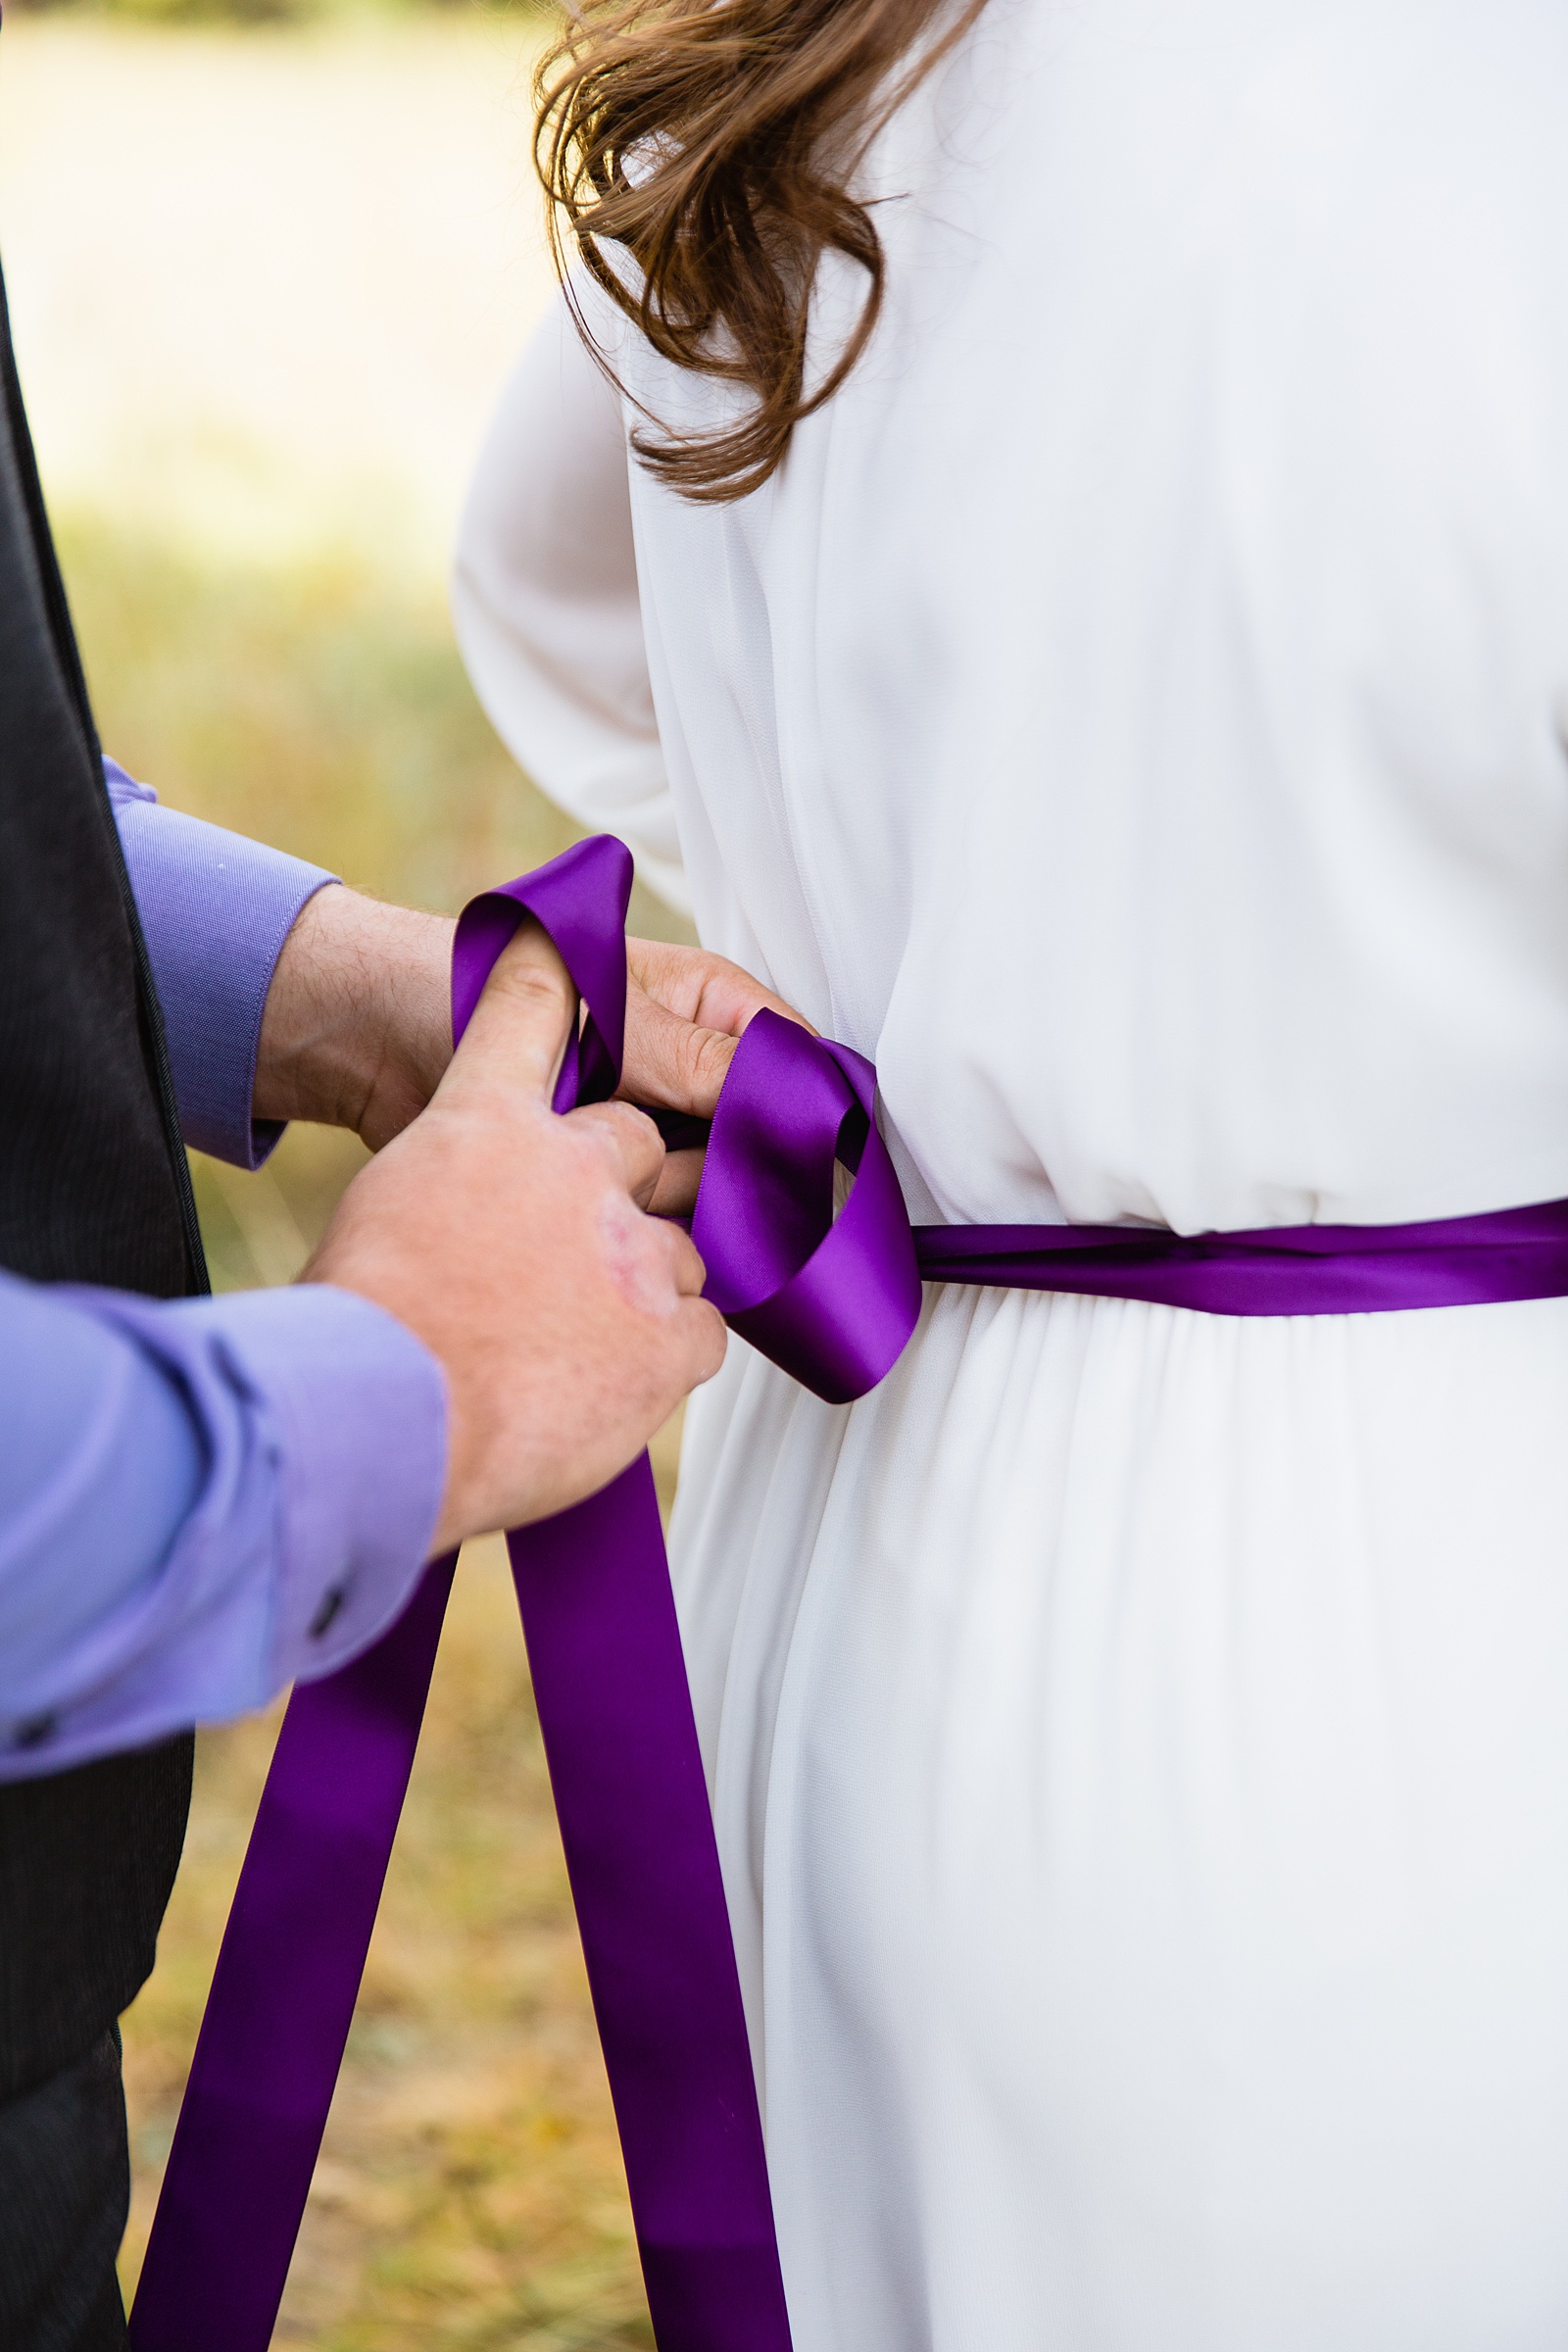 Groom helping the bride tie on her purple sash while getting ready for their elopement by Arizona elopement photographers PMA Photographer